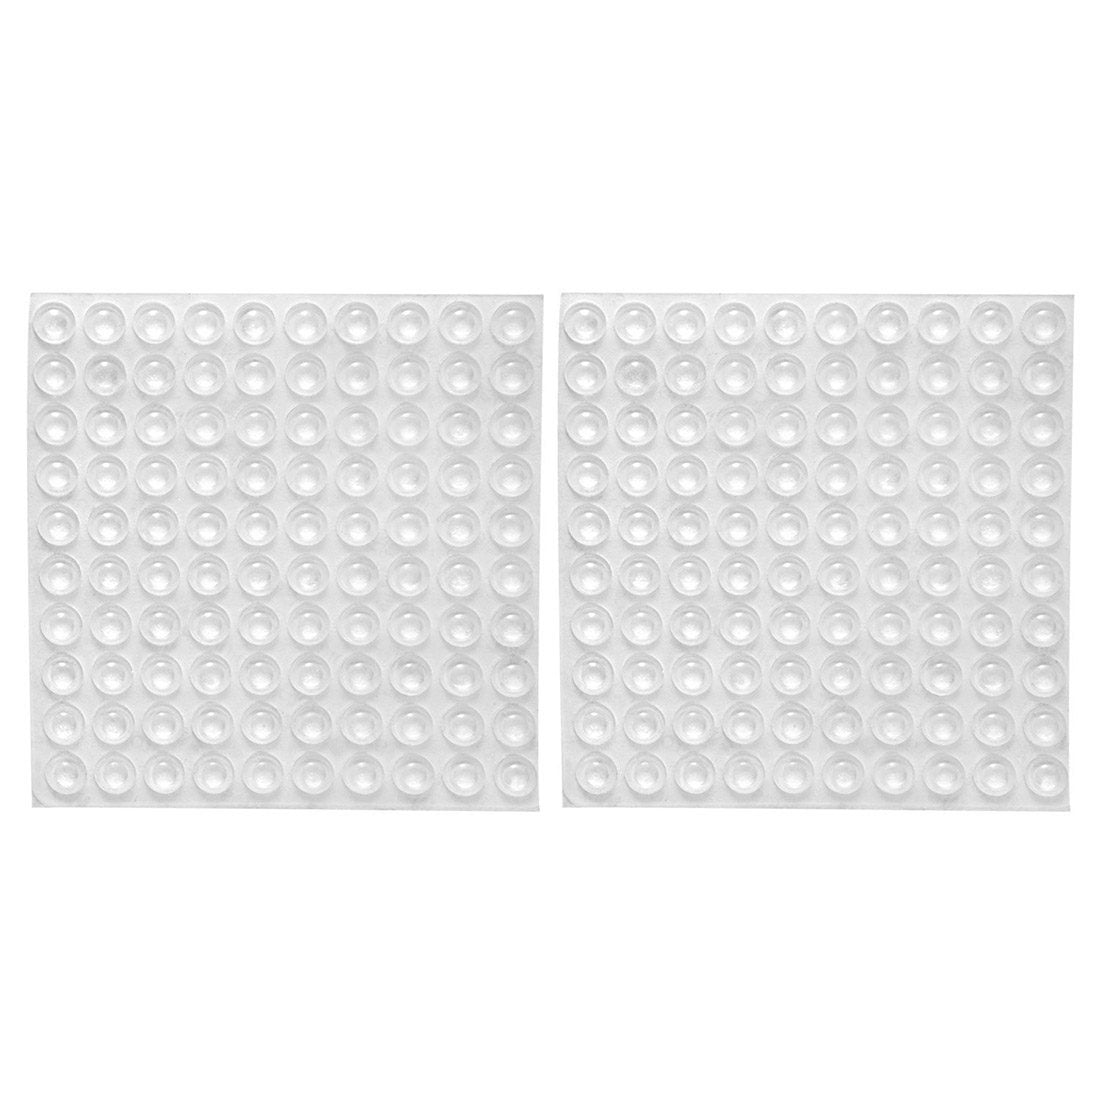 100 PCS Round 0.3" Self-Adhesive Rubber Feet Door Bumpers Buffer Pad Protector 